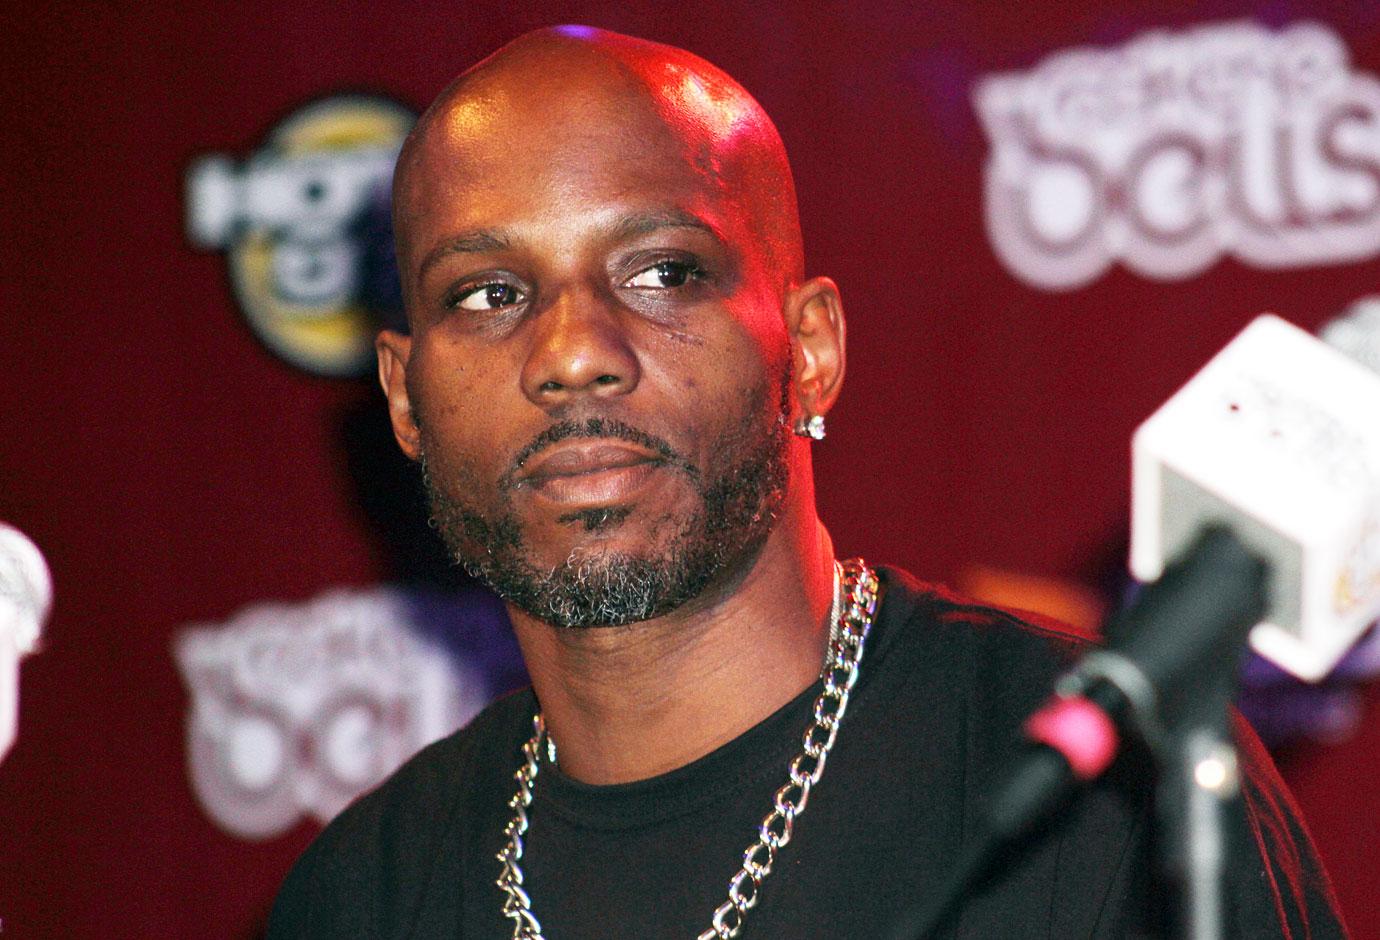 Rapper DMX's official cause of death revealed